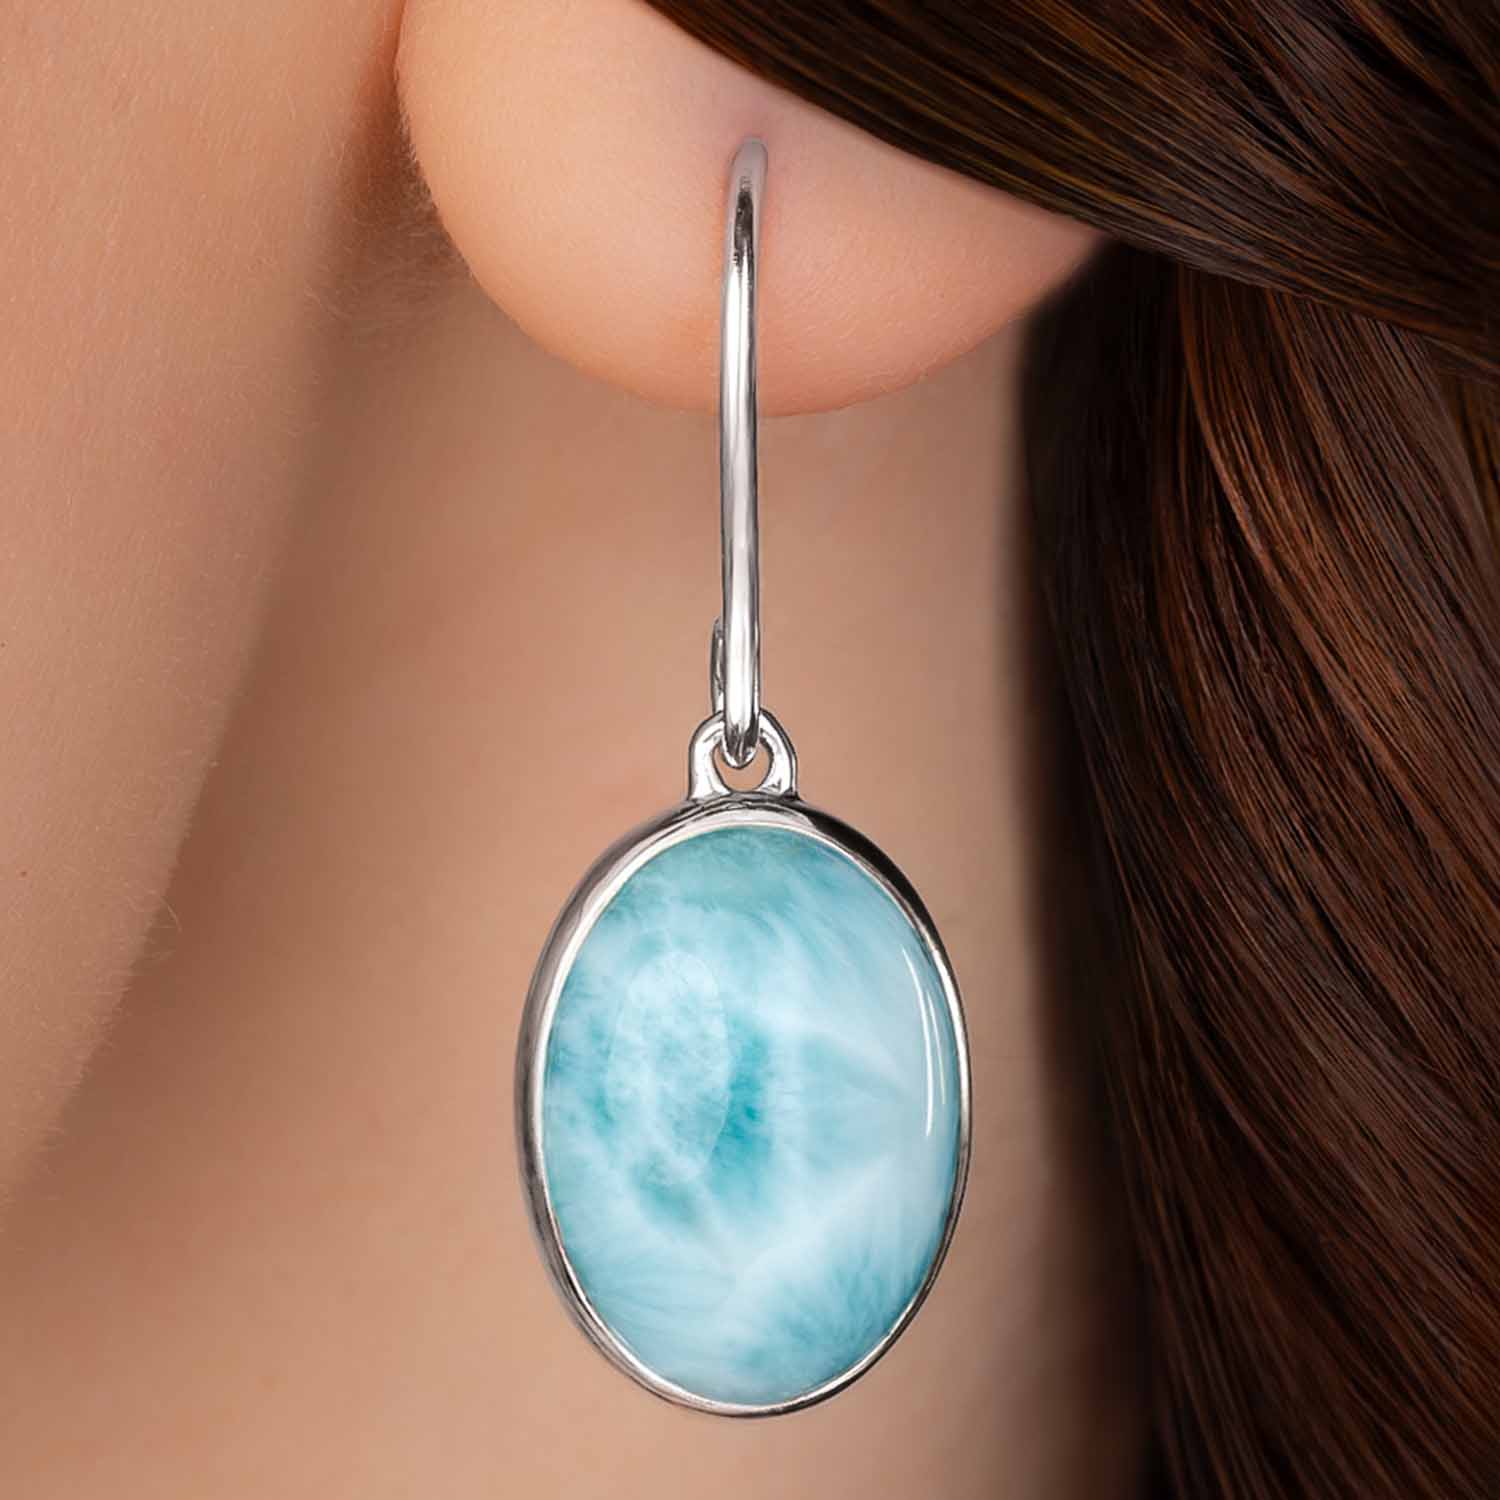 Oval Earrings in silver with larimar by marahlago